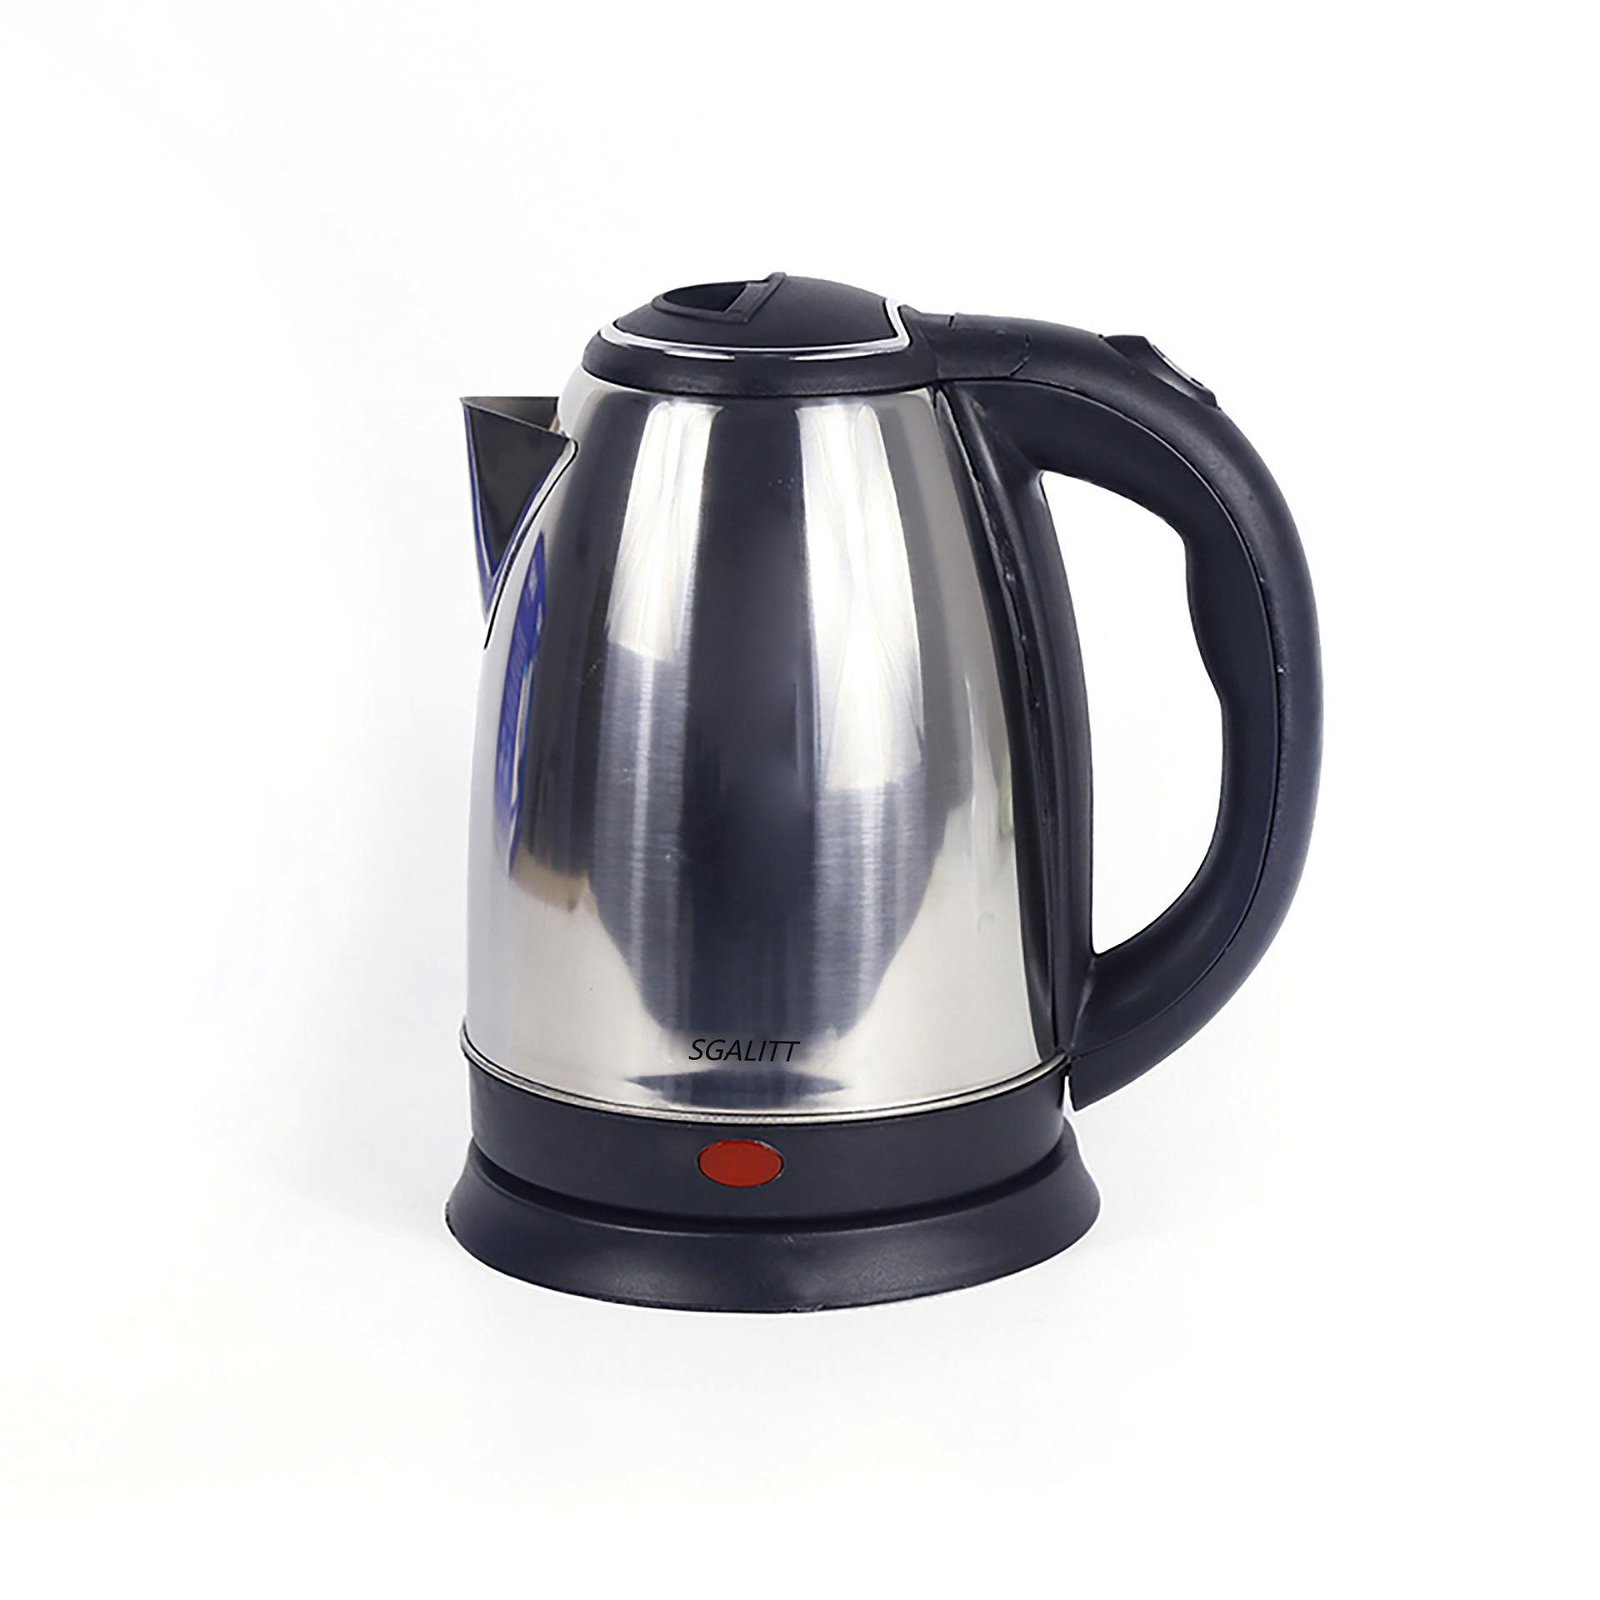 Household 2L stainless steel electric kettle